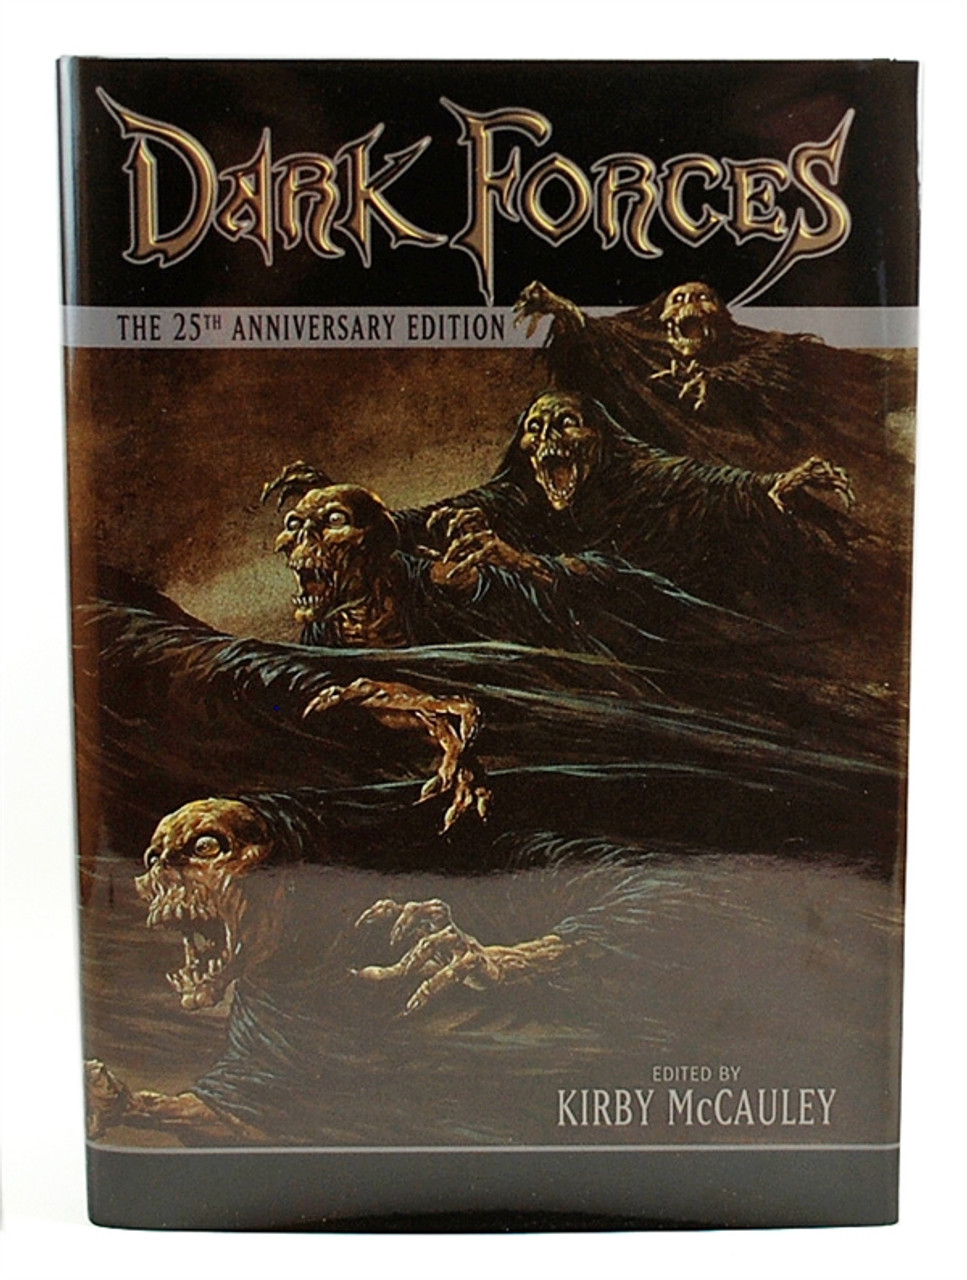 "Dark Forces: The 25th Anniversary Edition" edited by Kirby McCauley" Signed Limited Deluxe #13 of 300 (As New)